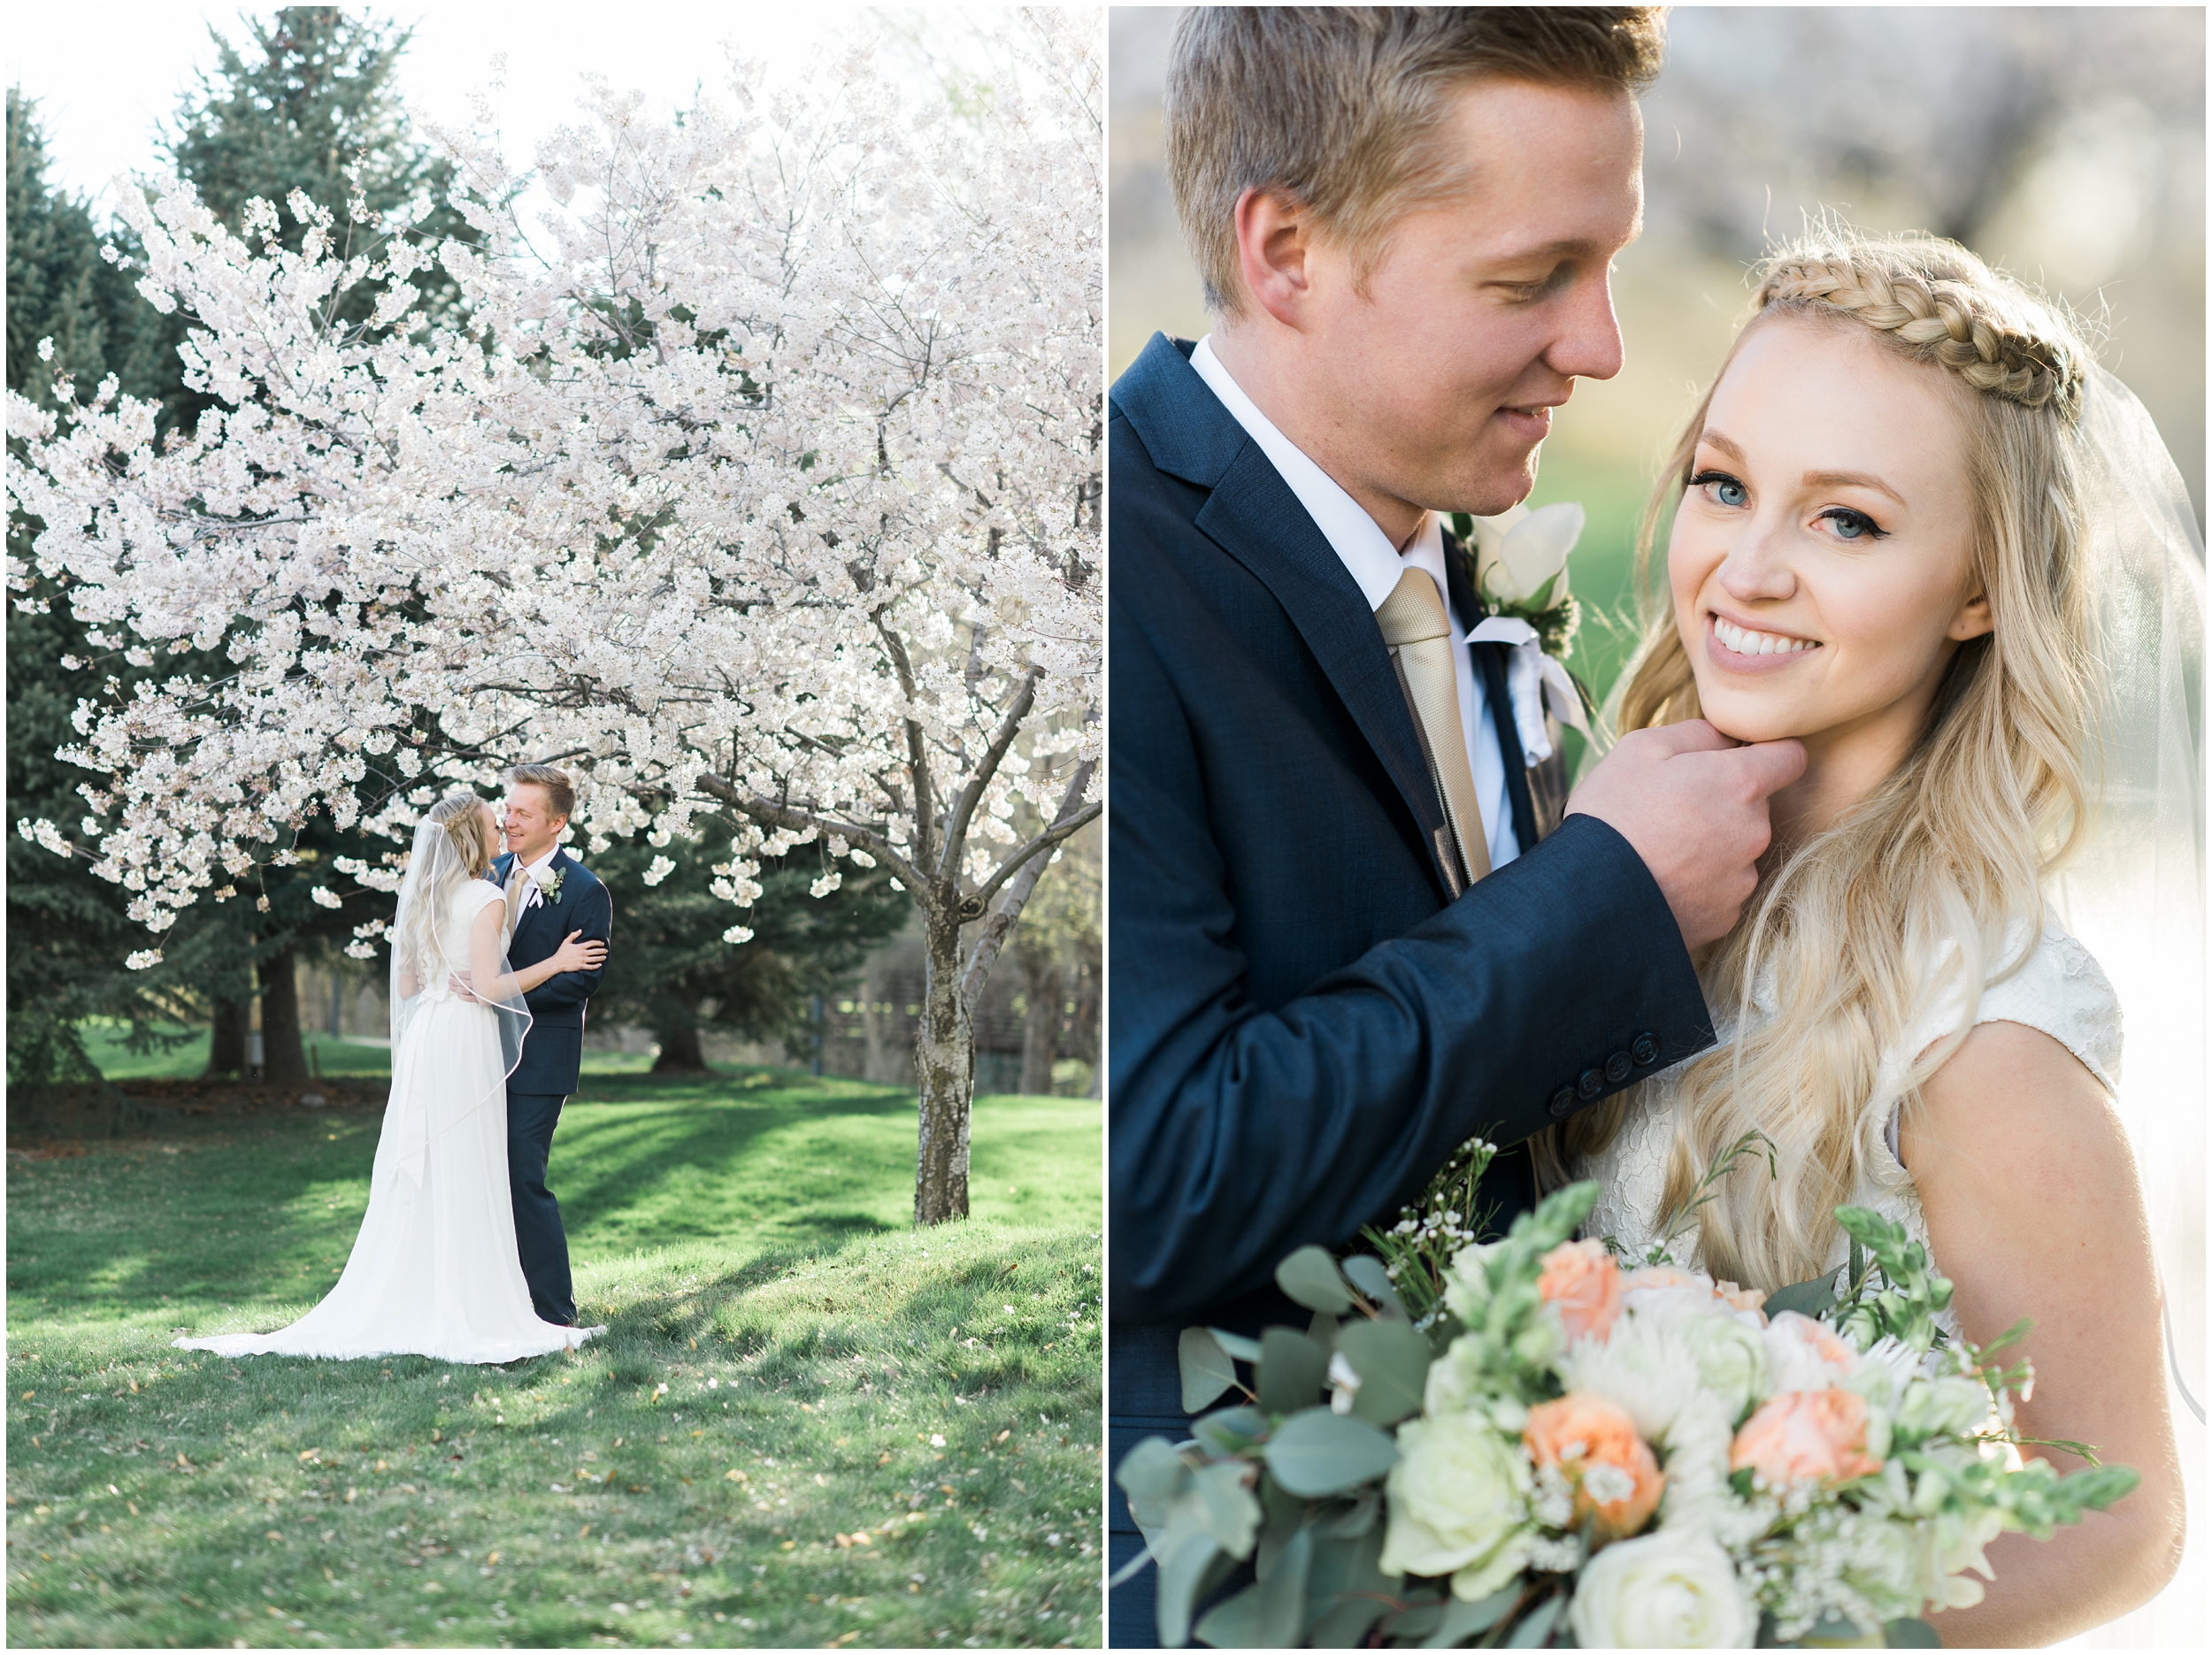 Kristina Curtis, blush flowers, spring blossoms photos, spring engagements, outdoor engagements, long veil, blush and navy wedding, spring outdoor engagements, photographers in Utah, Utah family photographer, family photos Utah, Kristina Curtis photography, Kristina Curtis Photographer, www.kristinacurtisphotography.com